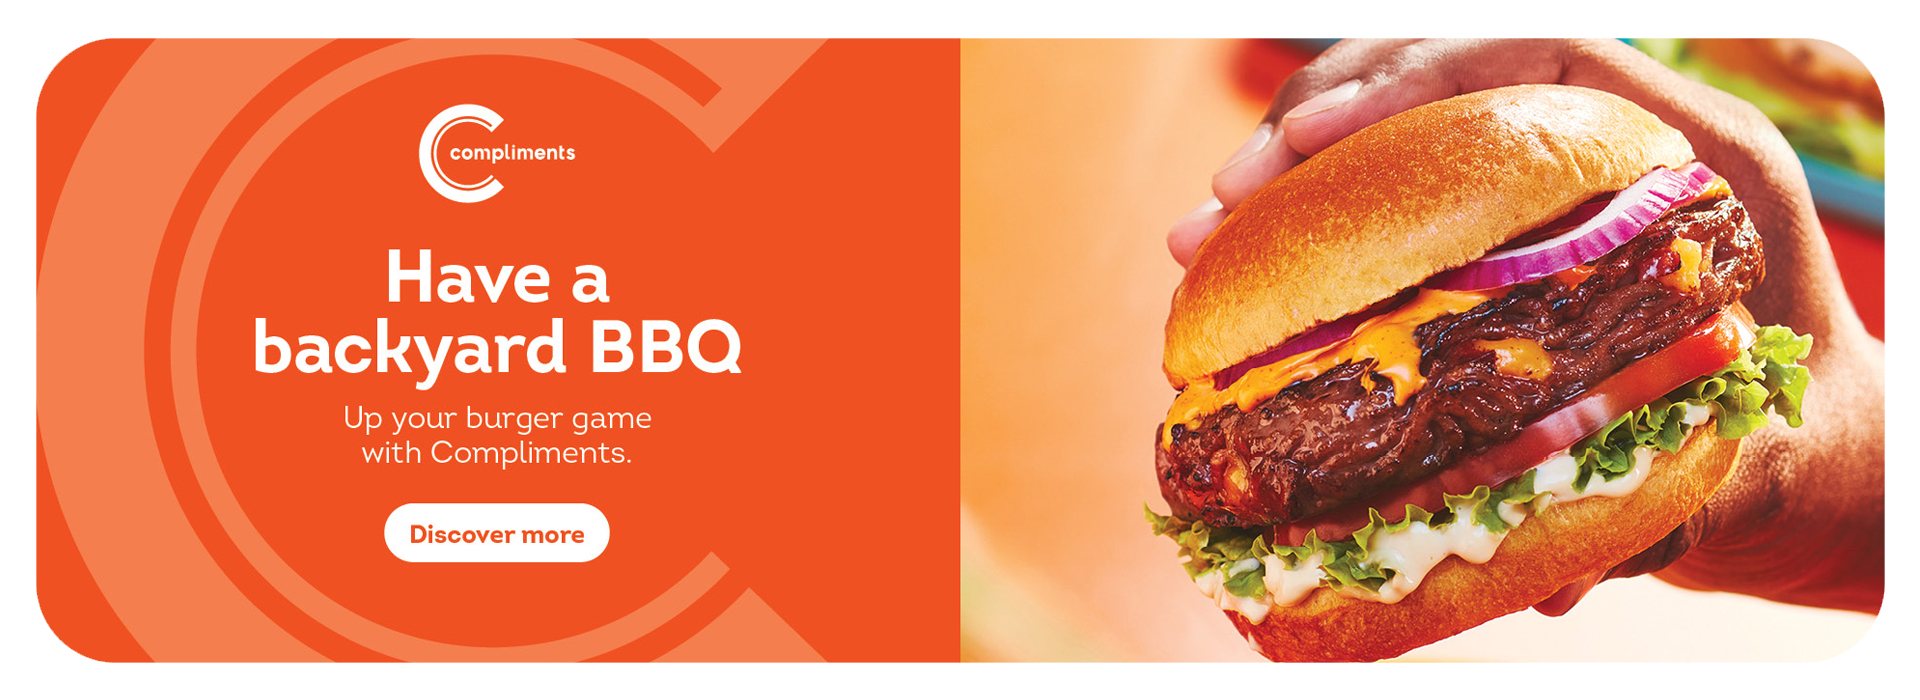 Text Reading "Have a Backyard BBQ. Up your burger game with Compliments.Click on 'Discover More' Button to learn more" On the right side, a hand is shown holding a large hamburger.